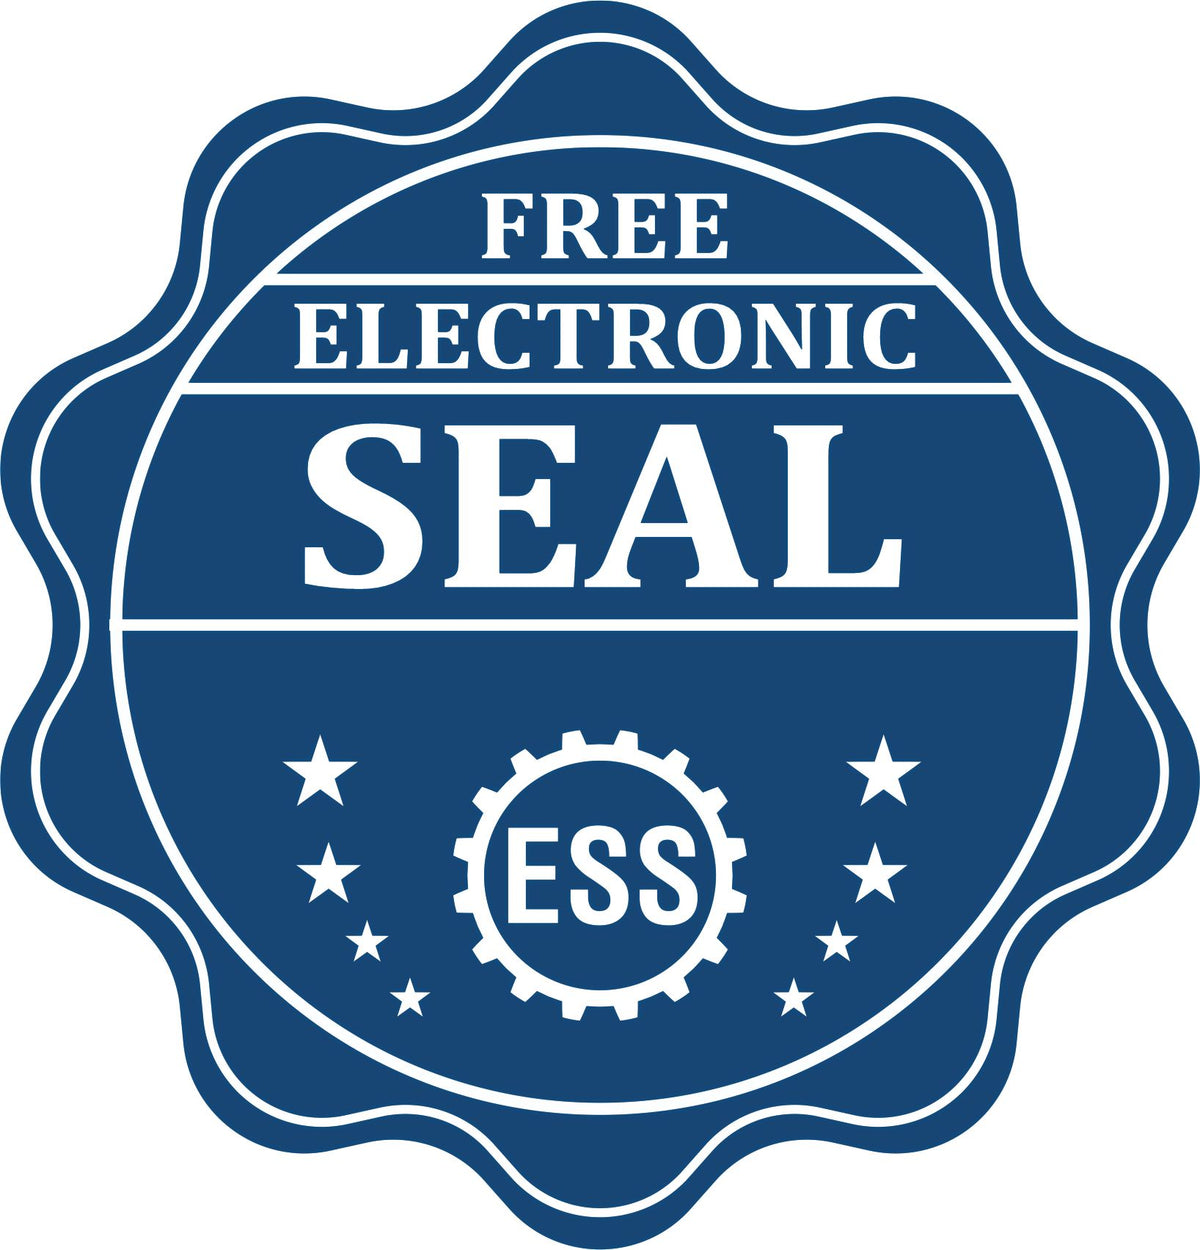 A badge showing a free electronic seal for the Super Slim Montana Notary Public Stamp with stars and the ESS gear on the emblem.